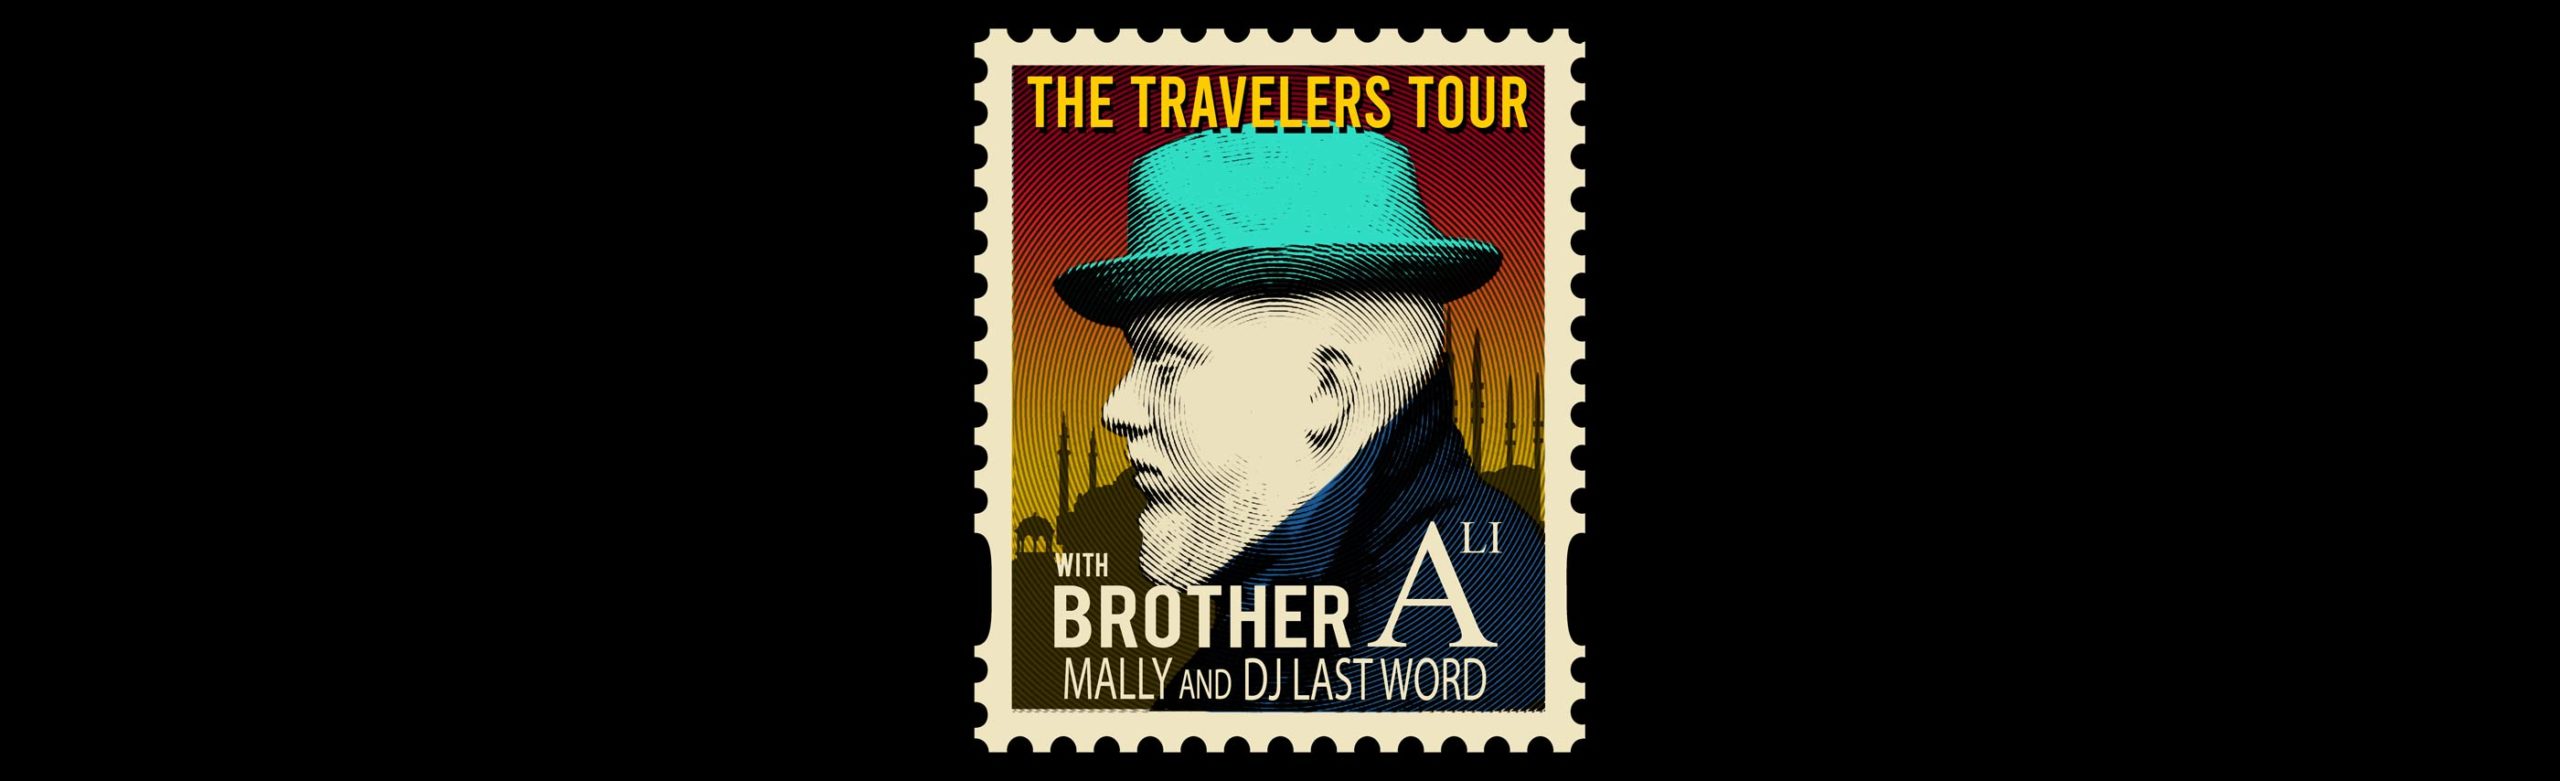 Brother Ali Confirms Missoula Show and Adds Support for Bozeman Performance Image